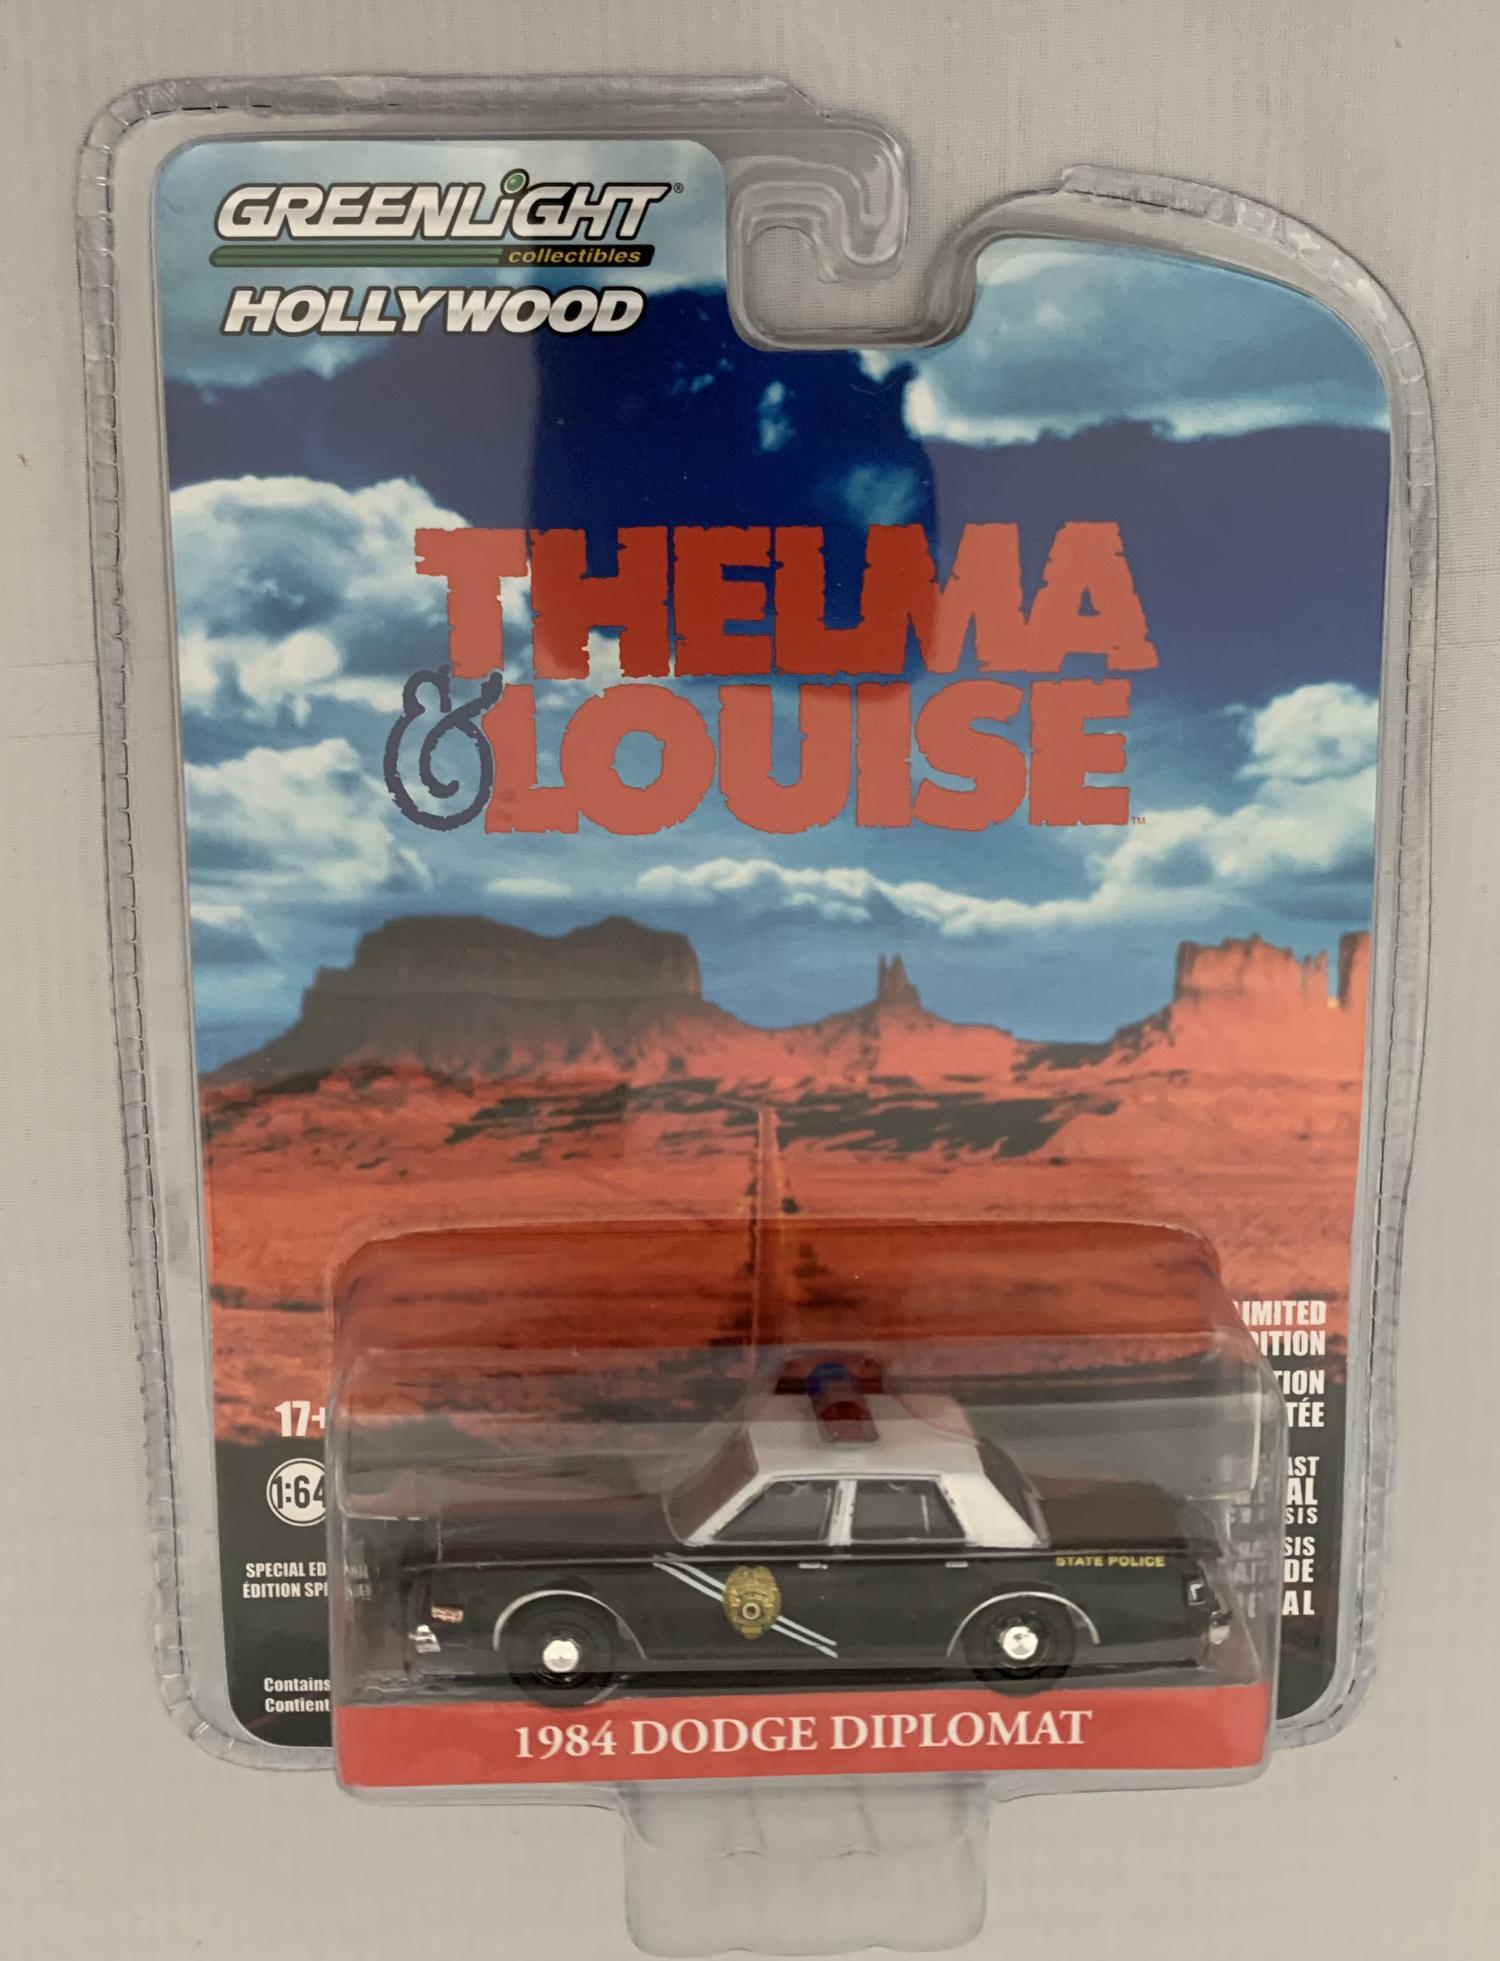 Thelma & Louise 1984 Dodge Diplomat in black state police car 1:64 scale model from Greenlight, limited edition